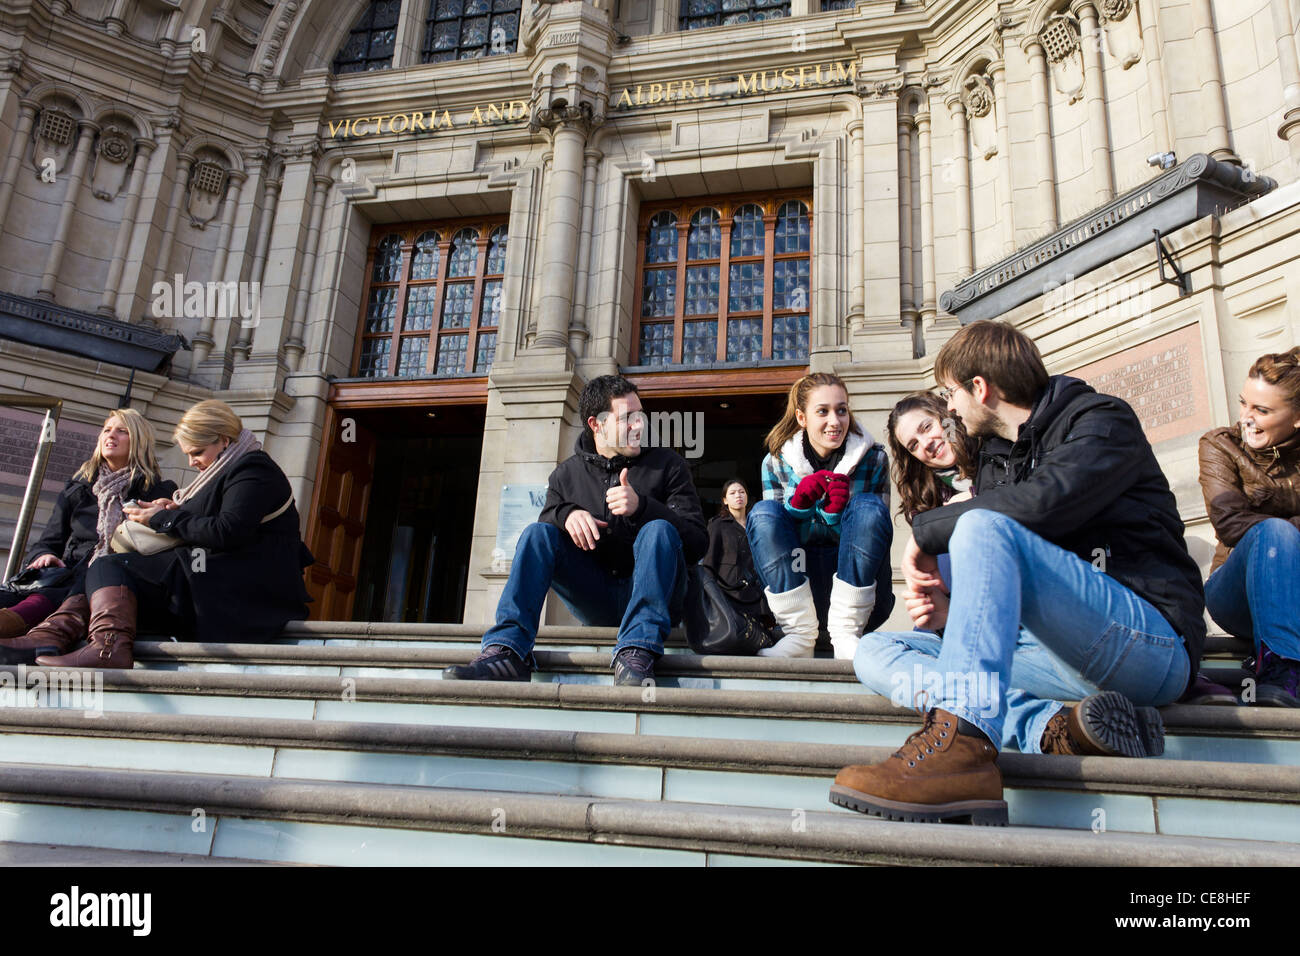 youths on the steps of the Victoria and Albert Museum, London, England, UK Stock Photo